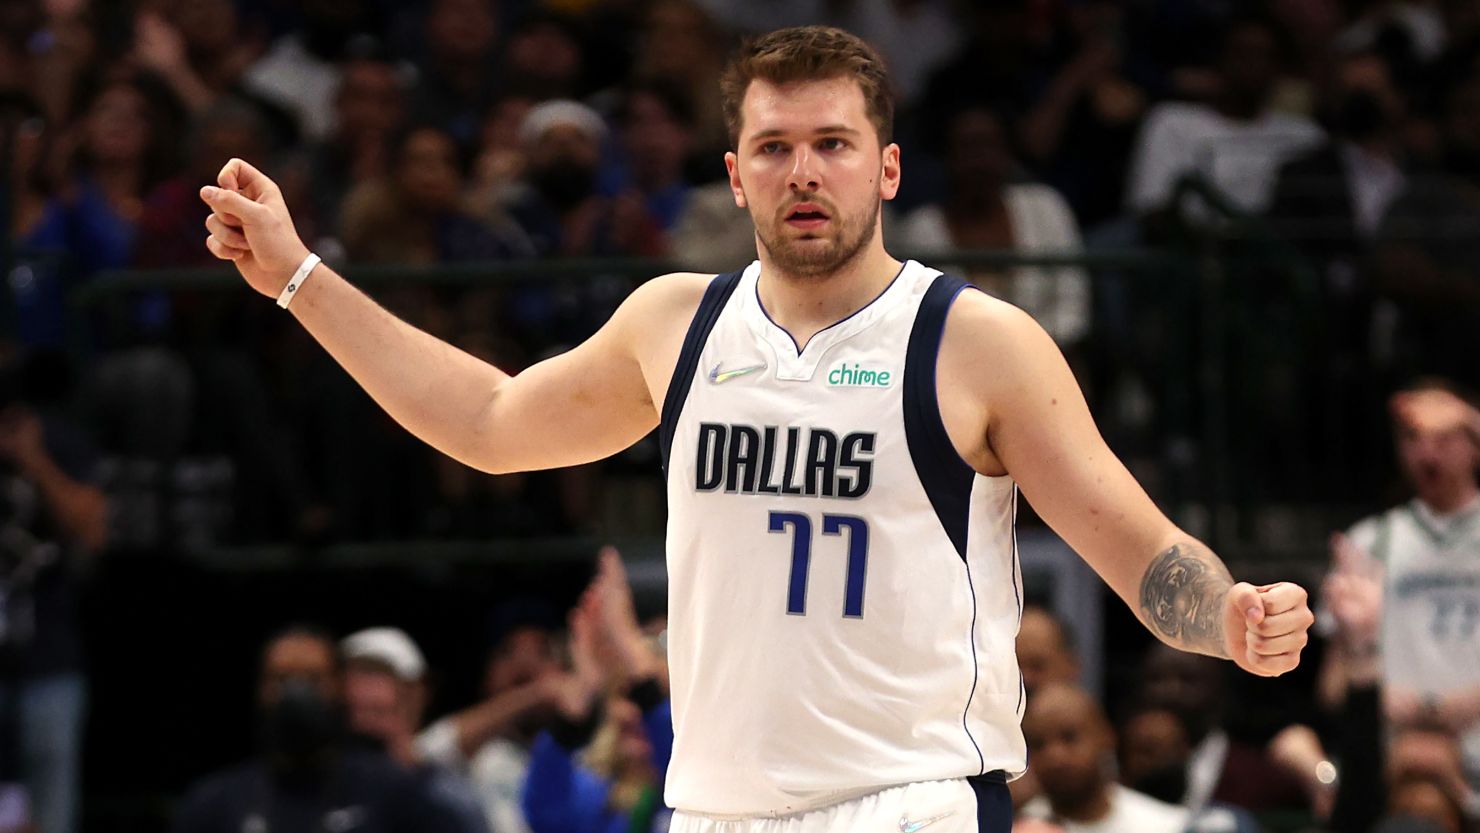 Luka Doncic led the Dallas Mavericks to victory in Game 4.